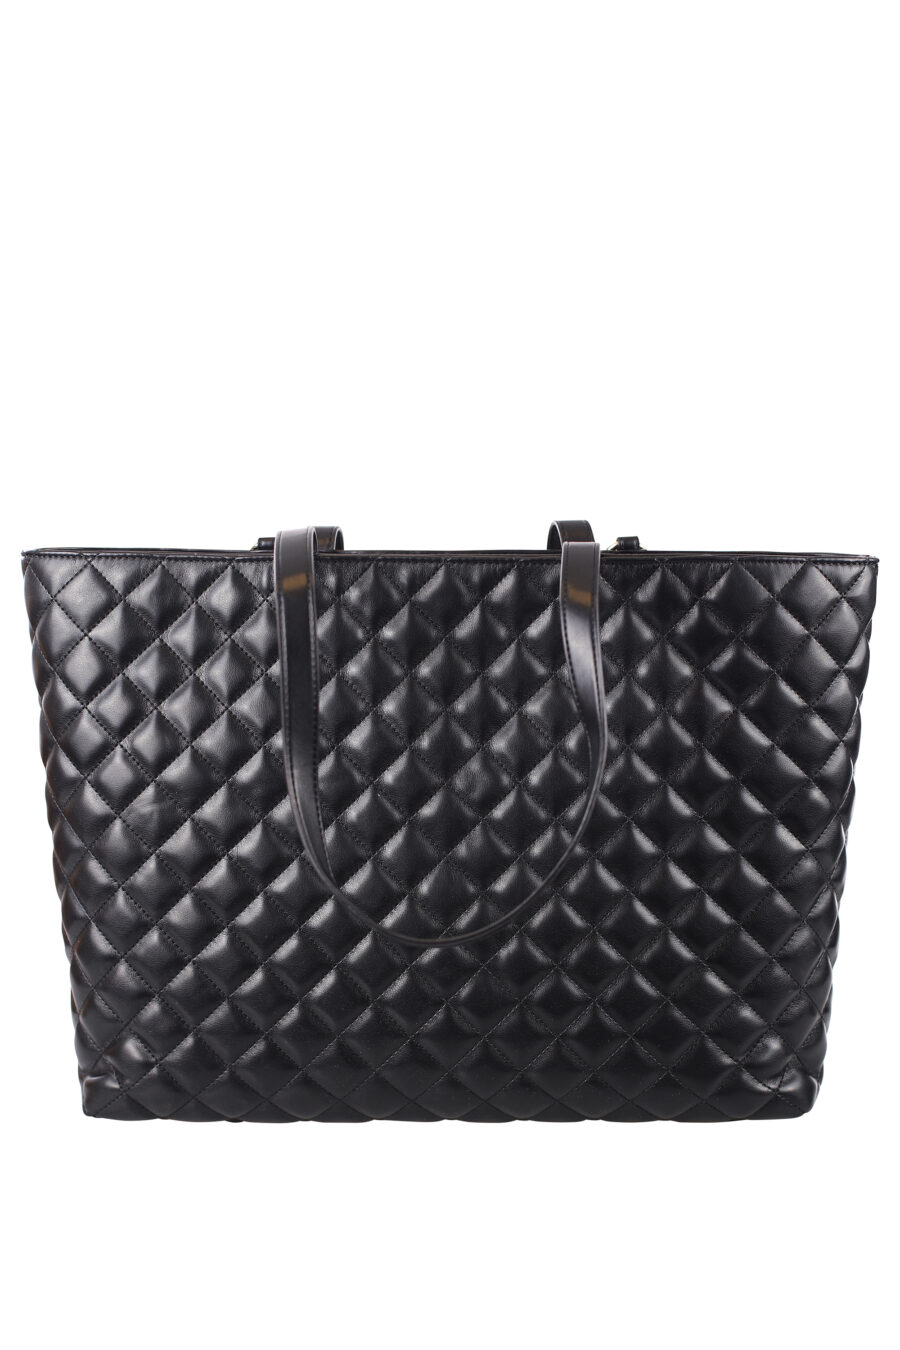 Black quilted shopper with chain charms - IMG 0681